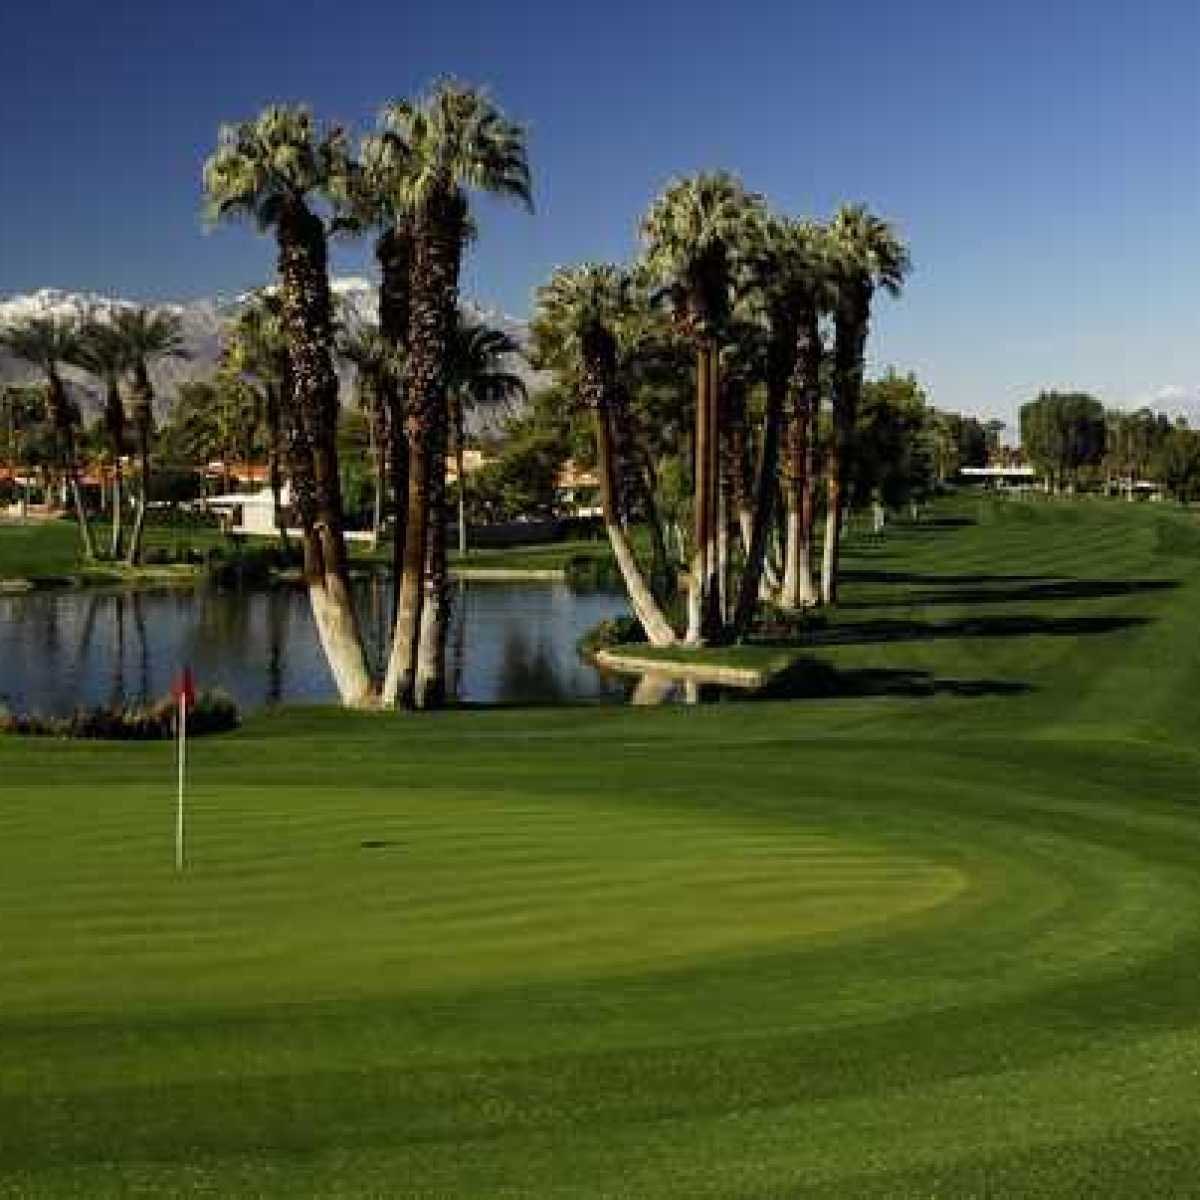 Bermuda Dunes Country Club | Luxury Homes For Sale in Indio, CA | GolfShire Homes